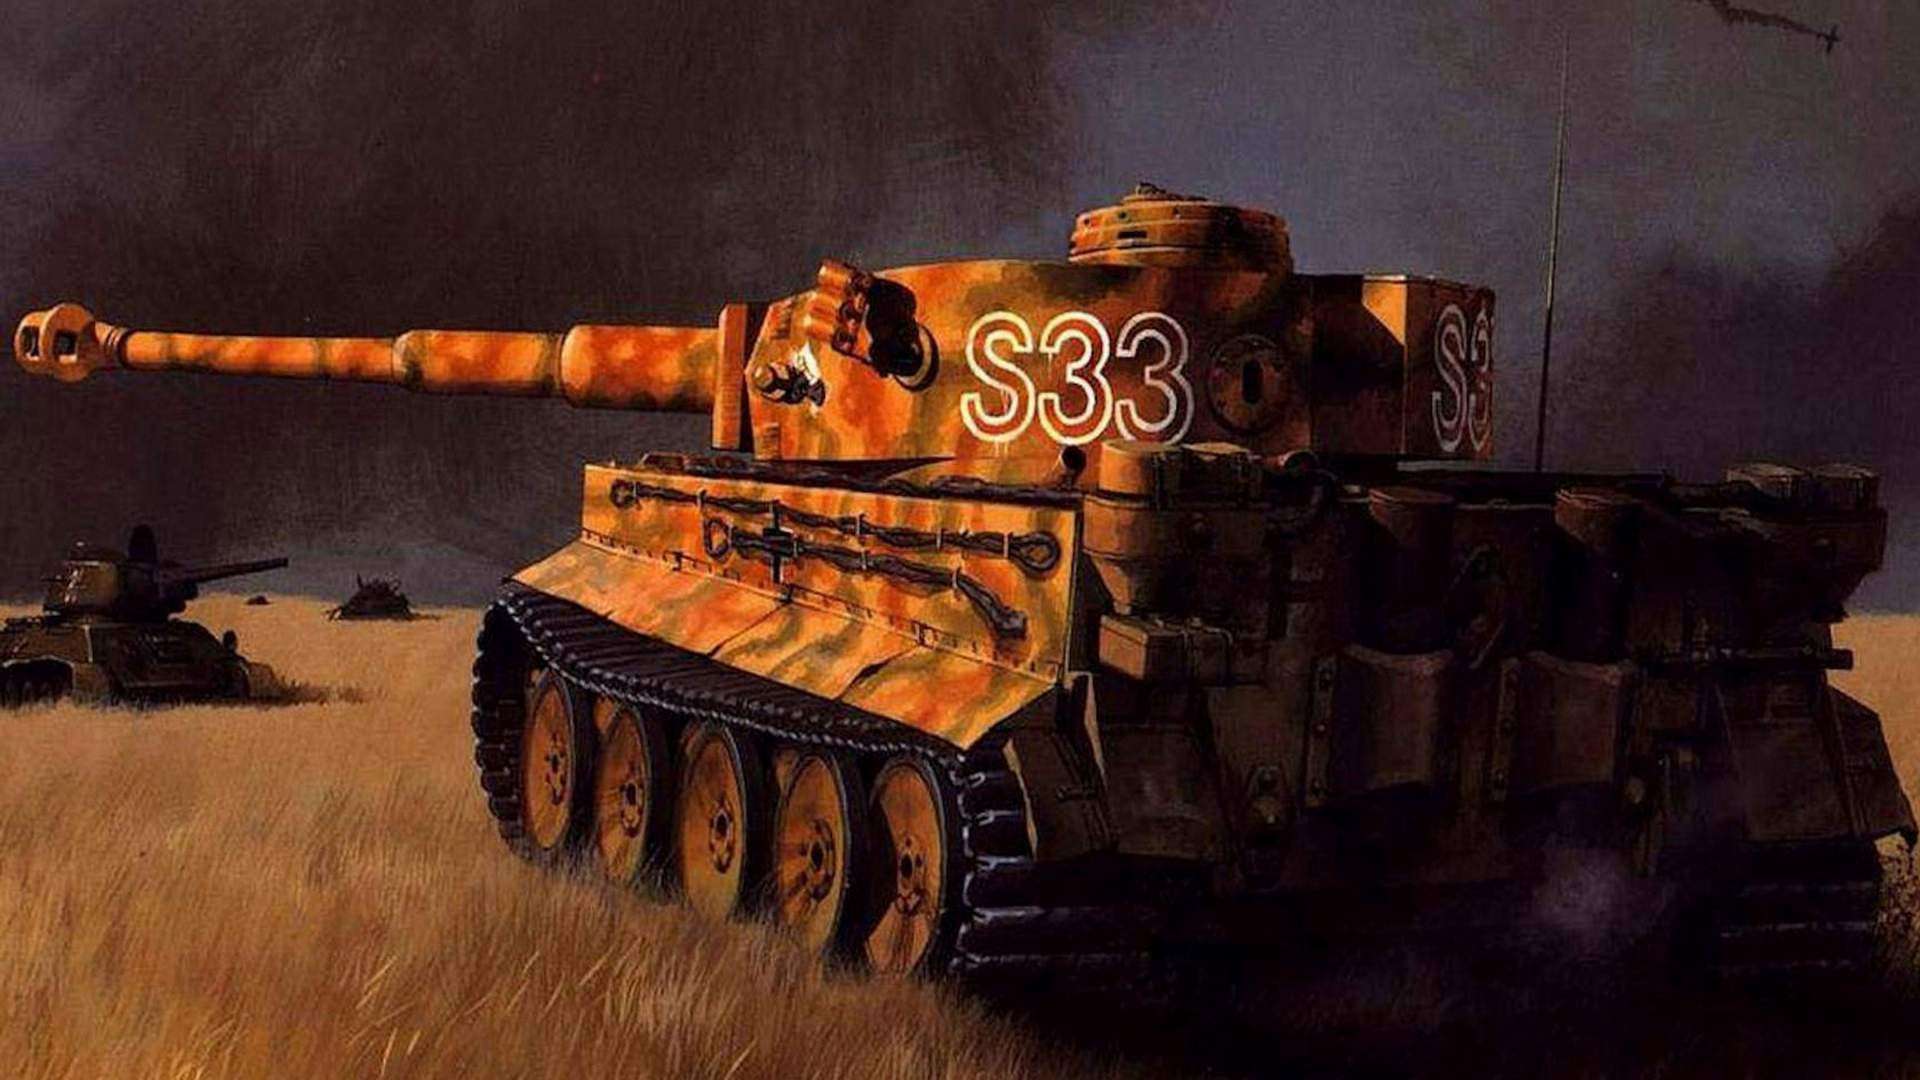 Tiger Tank HD Wallpapers Best Collection Of Tiger1 & Tiger2